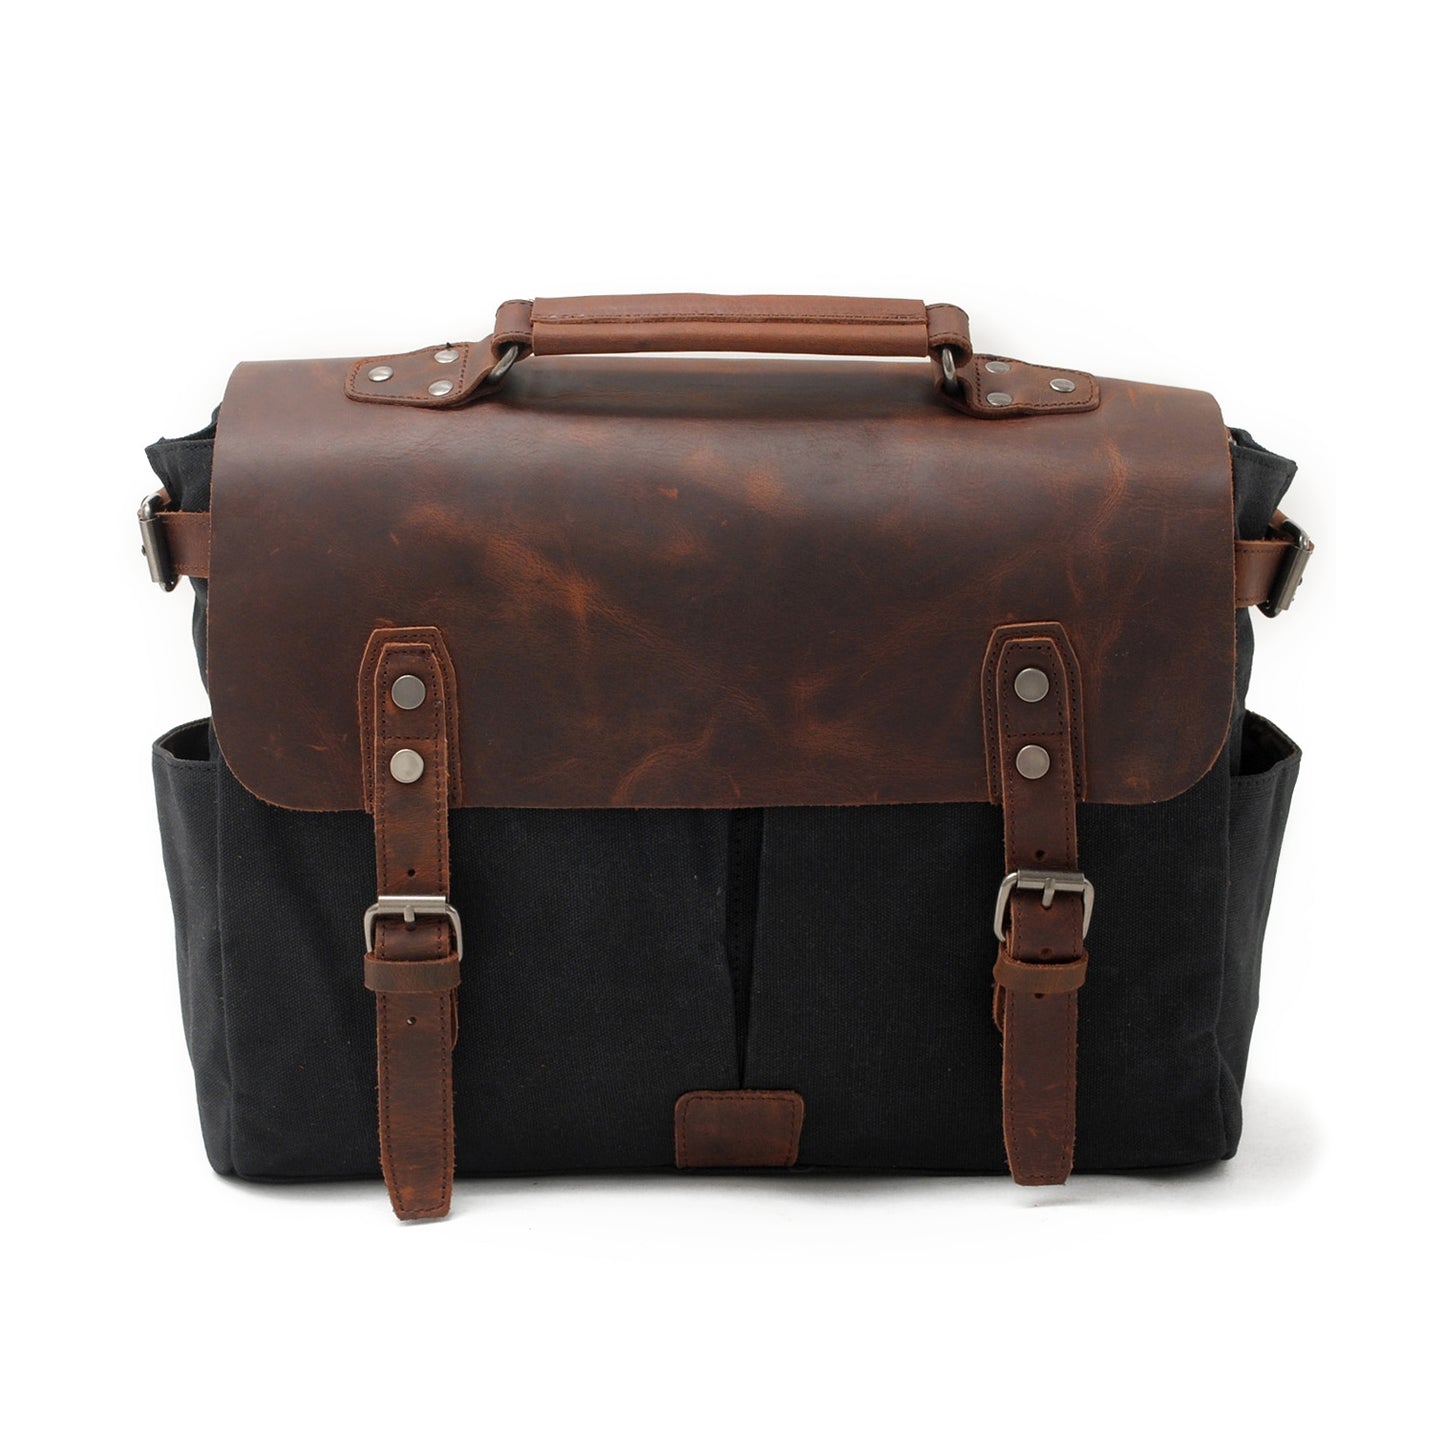 Vintage-Waxed-Canvas-and-Crazy-Horse-Leather-Laptop-Messenger-Bag-Black-i7bags-1-1